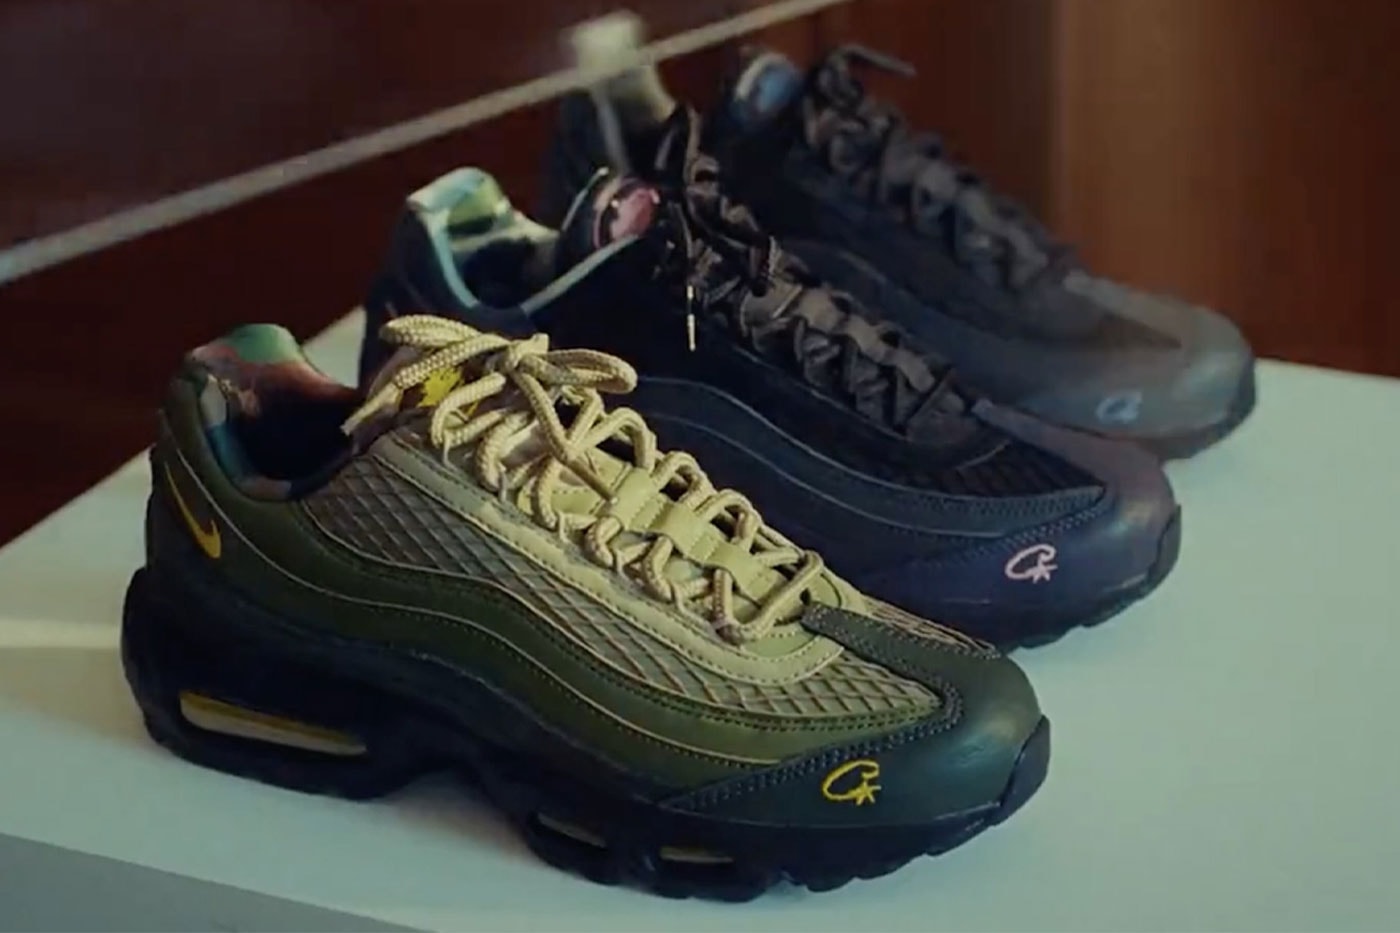 Nike Corteiz crtz airmax 95 green release date info store list buying guide photos price rules the world ad campaign info video view